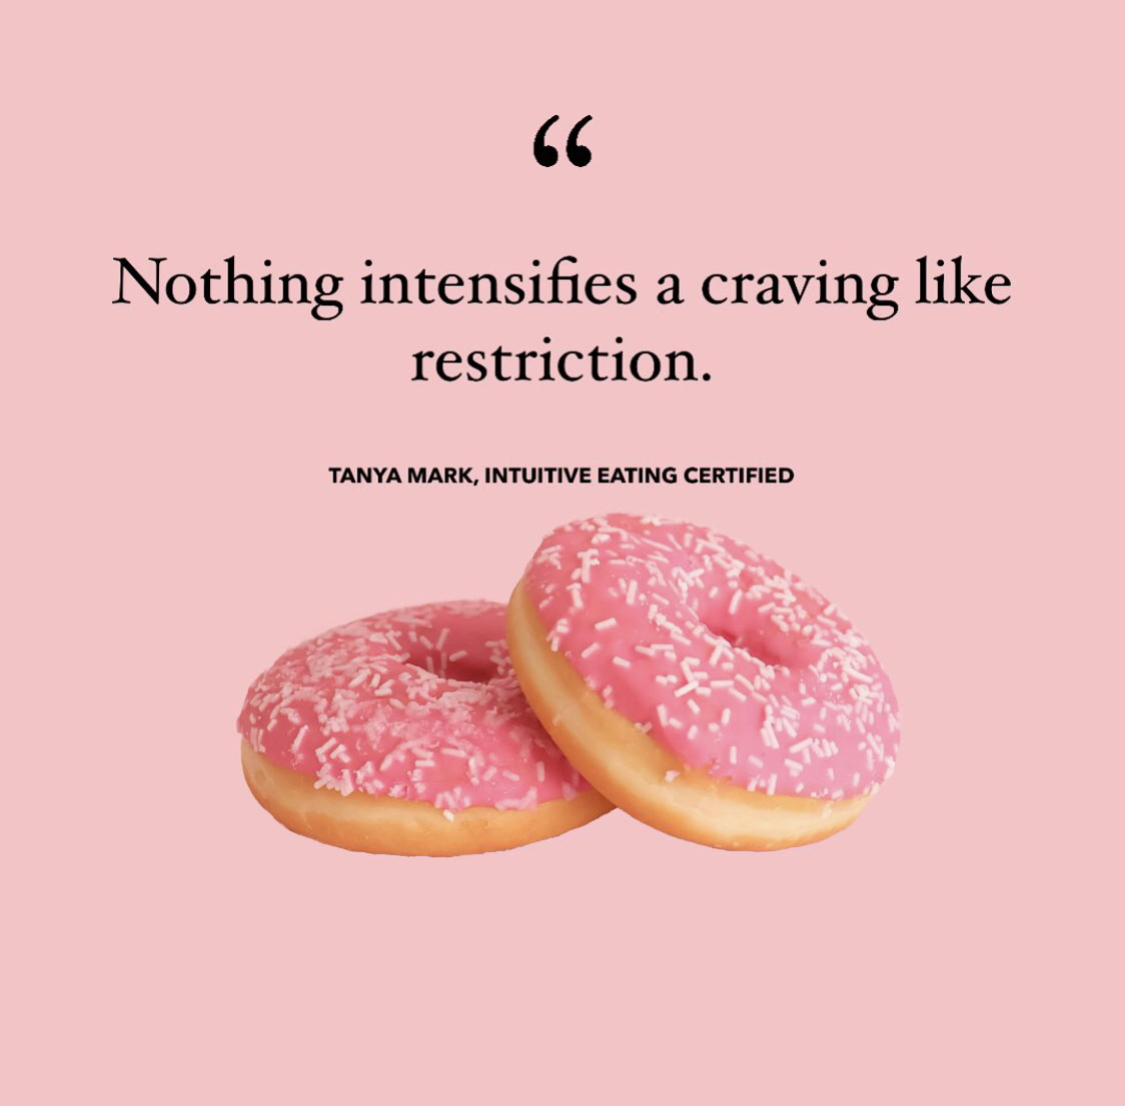 Nothing intensifies a craving like restriction